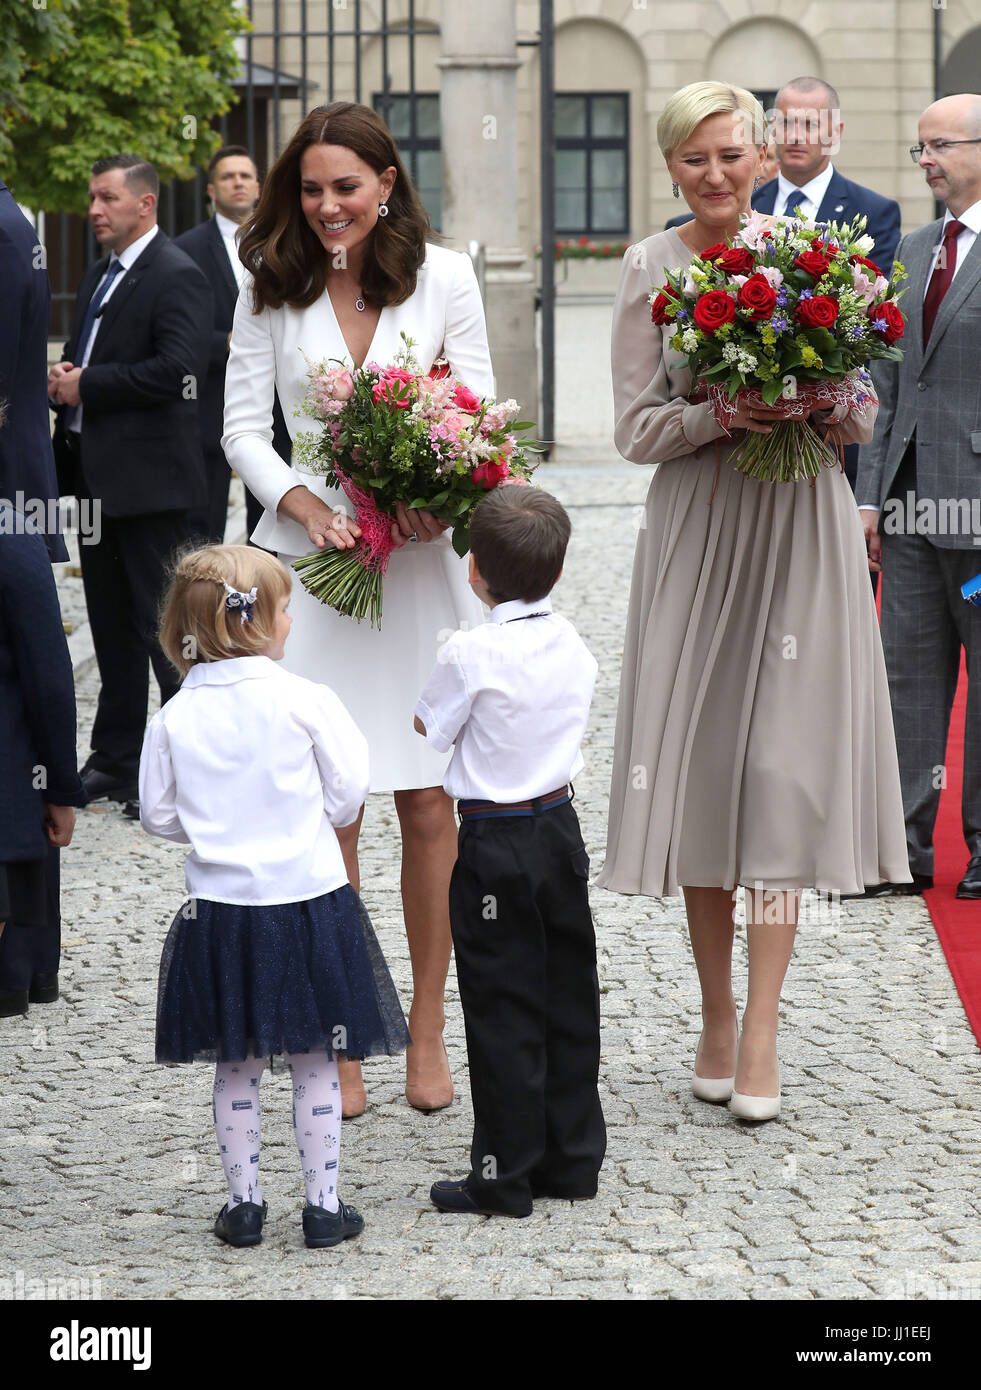 The Duchess of Cambridge meets young wellwishers with Poland's First Lady Agata Duda at the Presidential Palace in Warsaw, Poland, on the first day of her five-day tour of Poland and Germany. Stock Photo